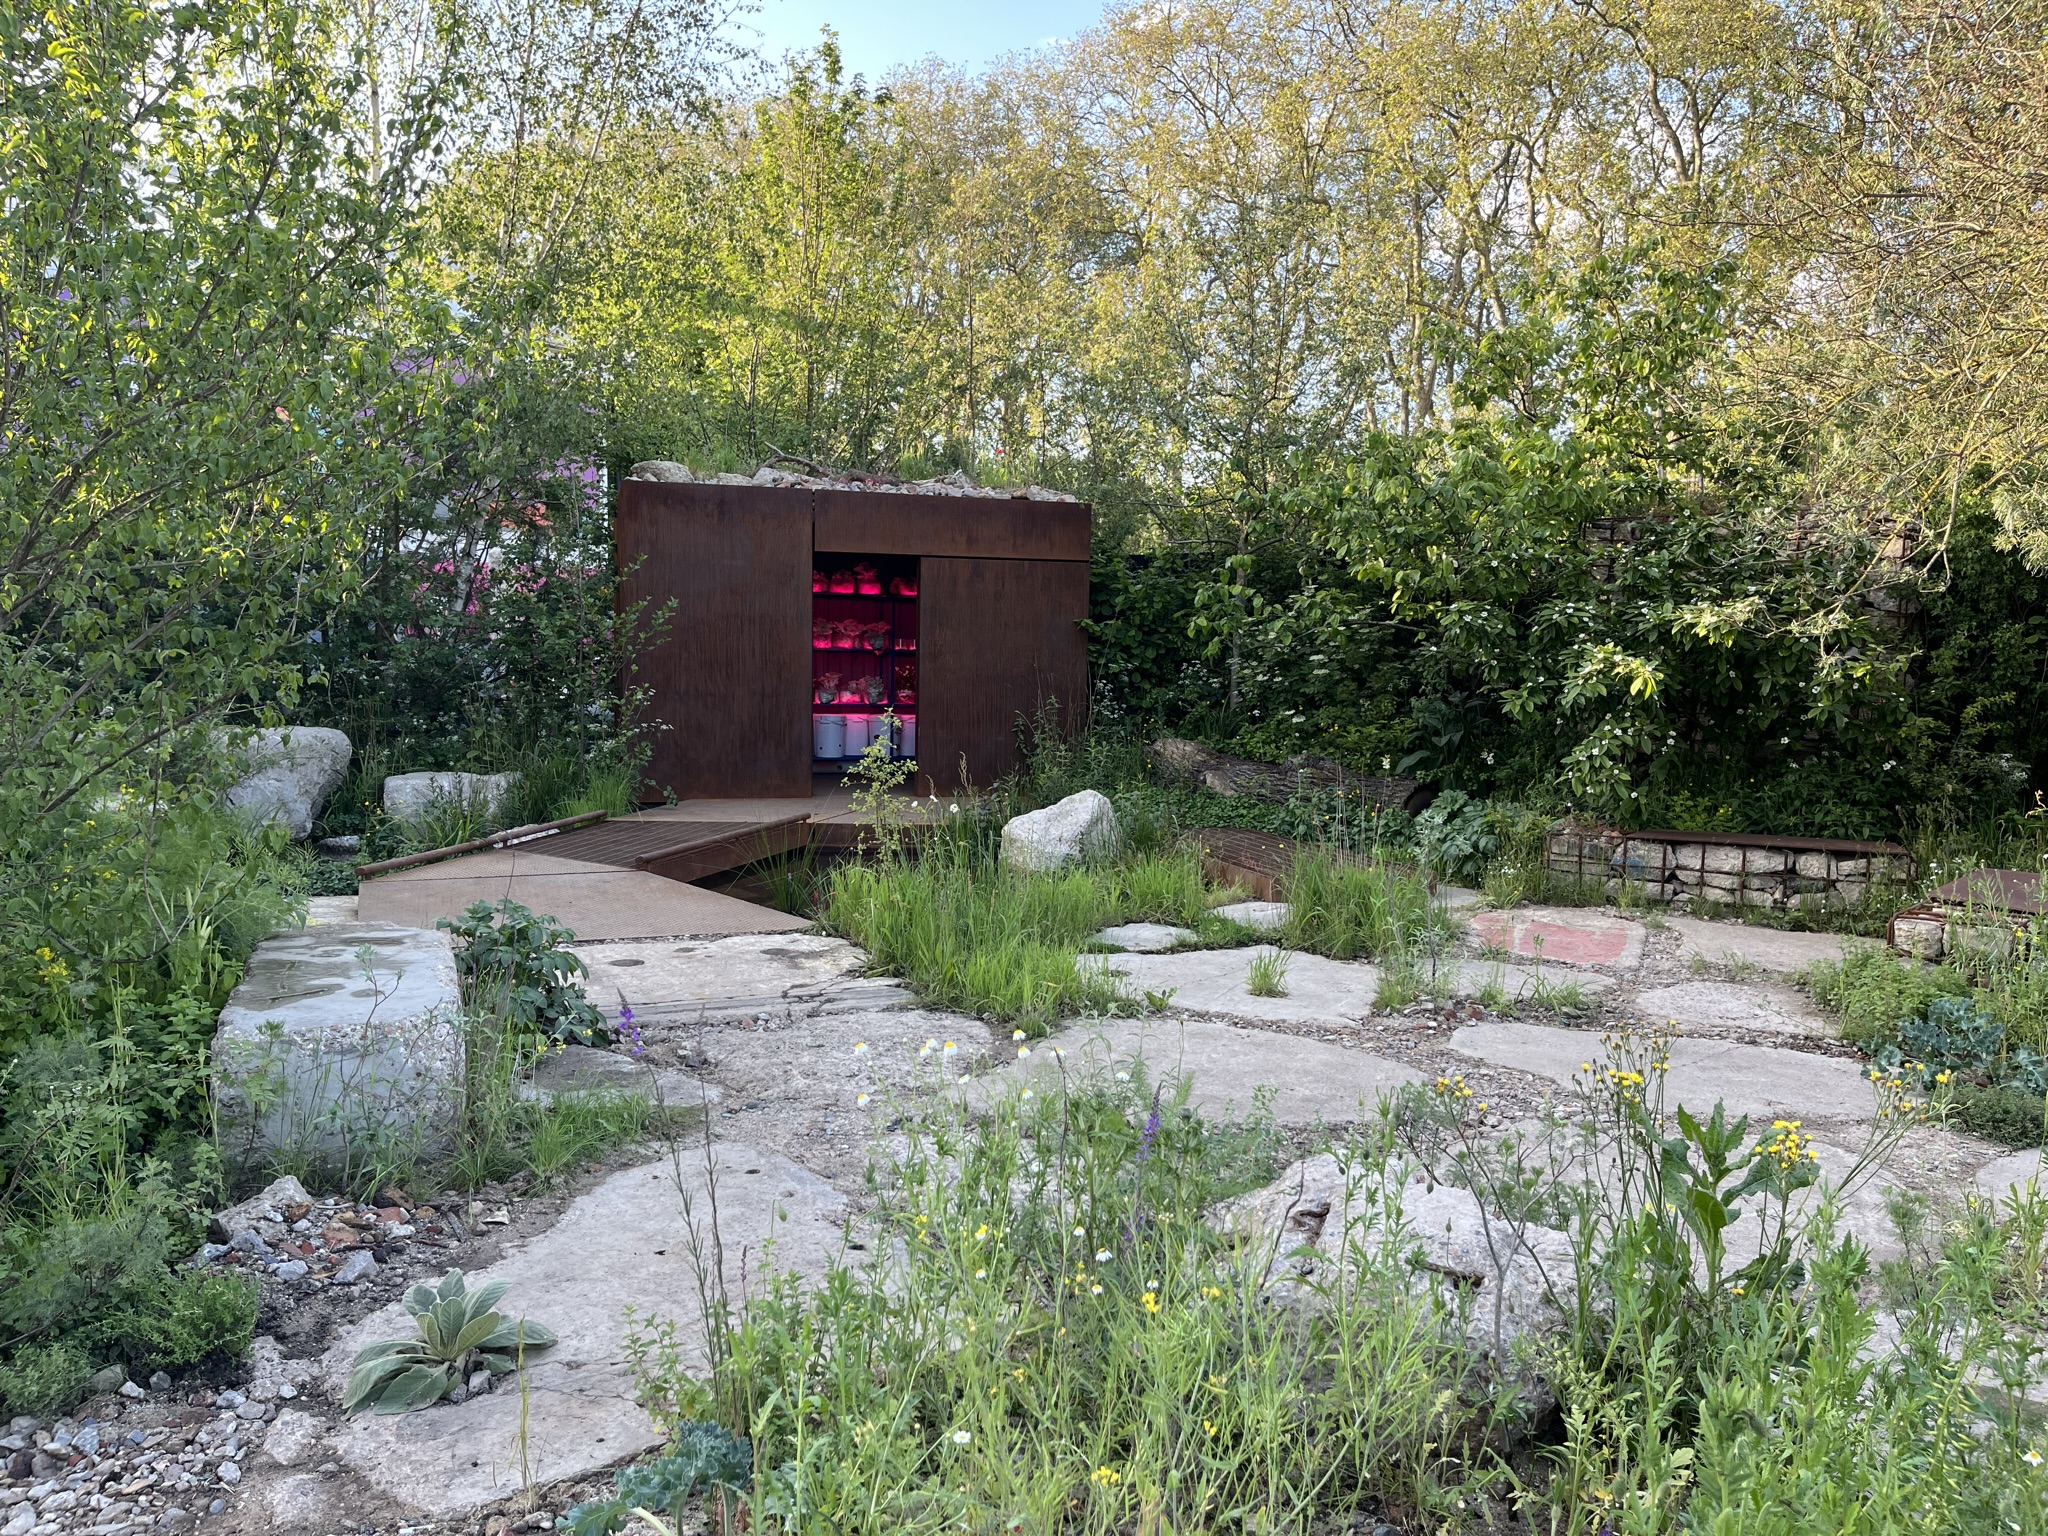 Urban style garden show with natural wildflower planting, wild planting, steel container with opening lit with red light, housing mushrooms